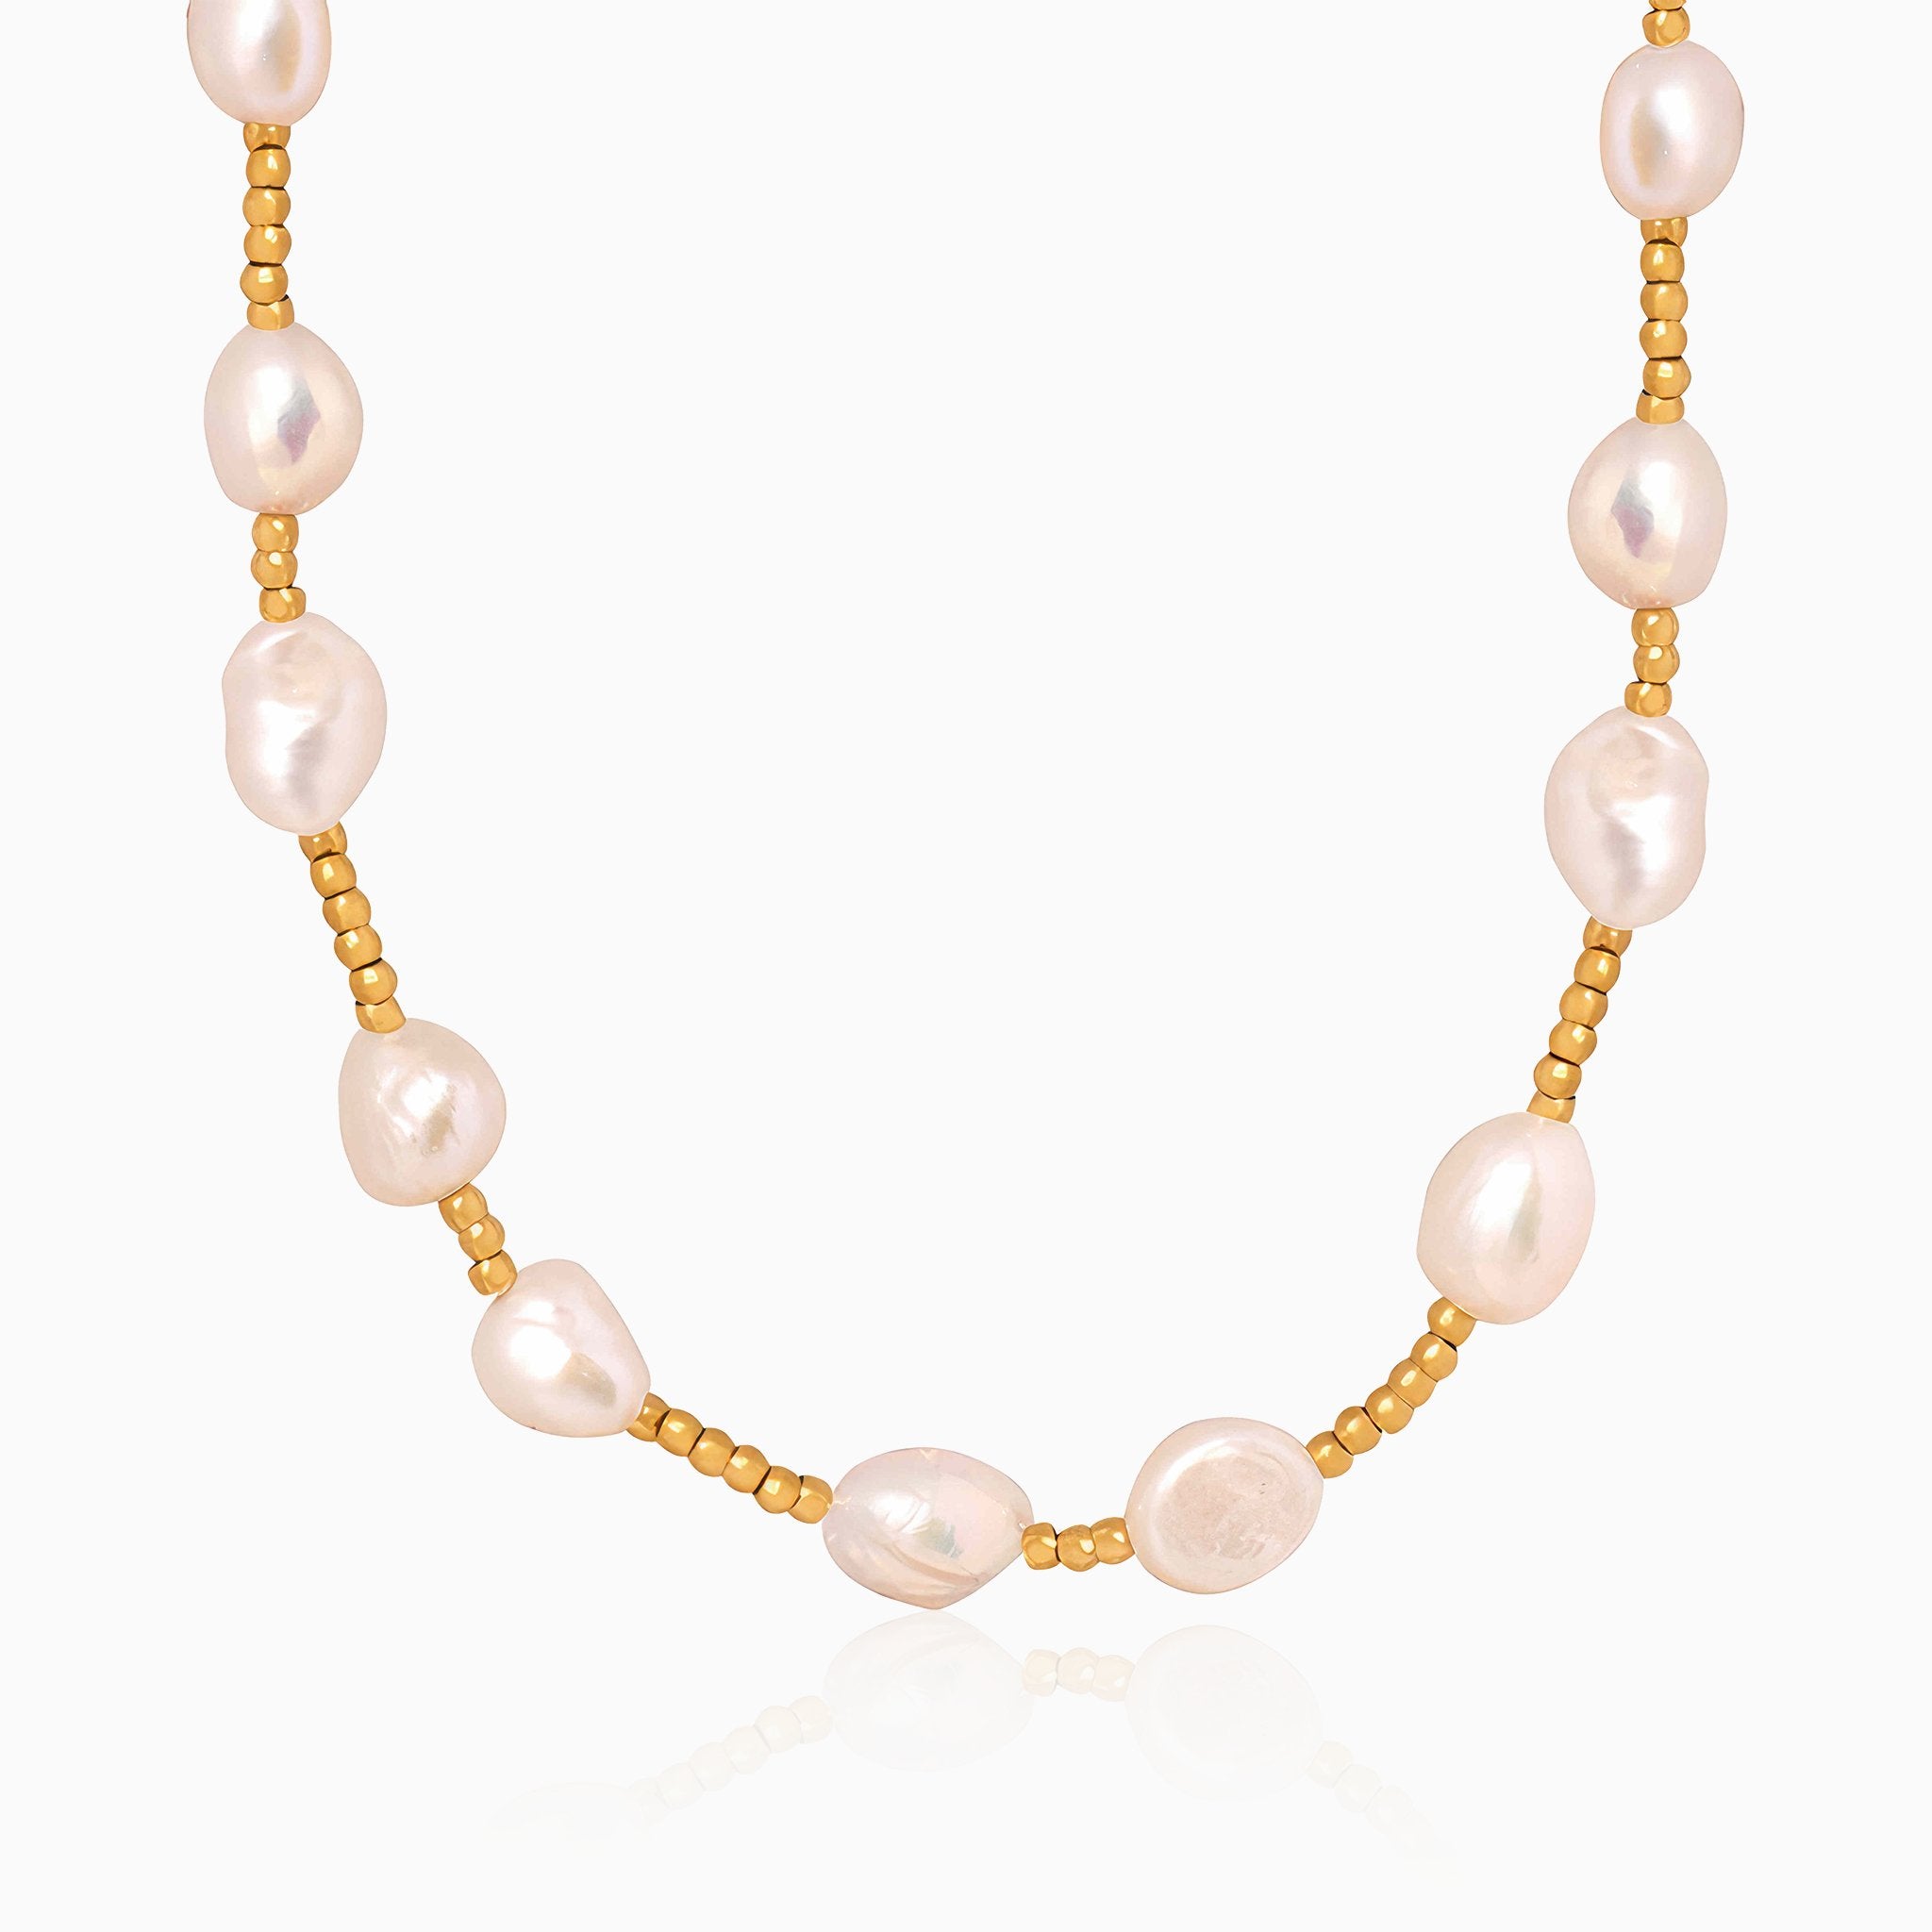 Elegant Pearl & Round Bead Necklace - Nobbier - Necklace - 18K Gold And Titanium PVD Coated Jewelry